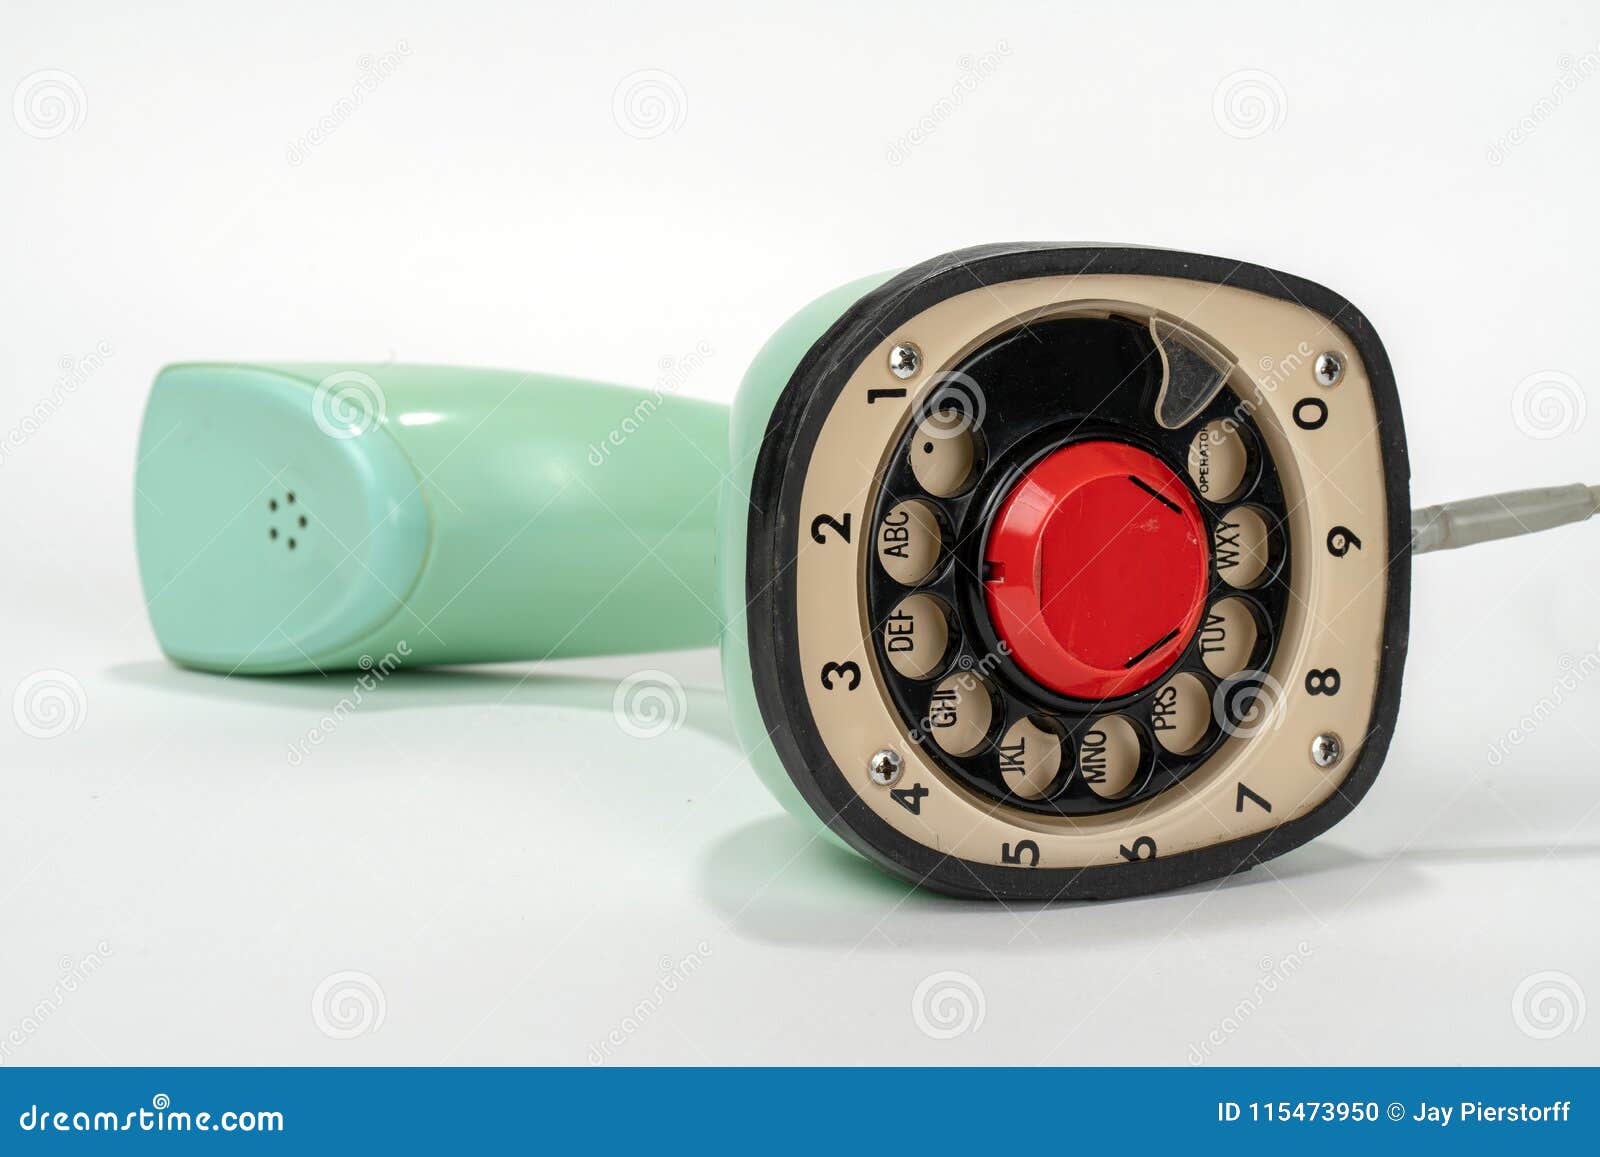 Vintage Supers One piece Telephone - www.edfsa.ht